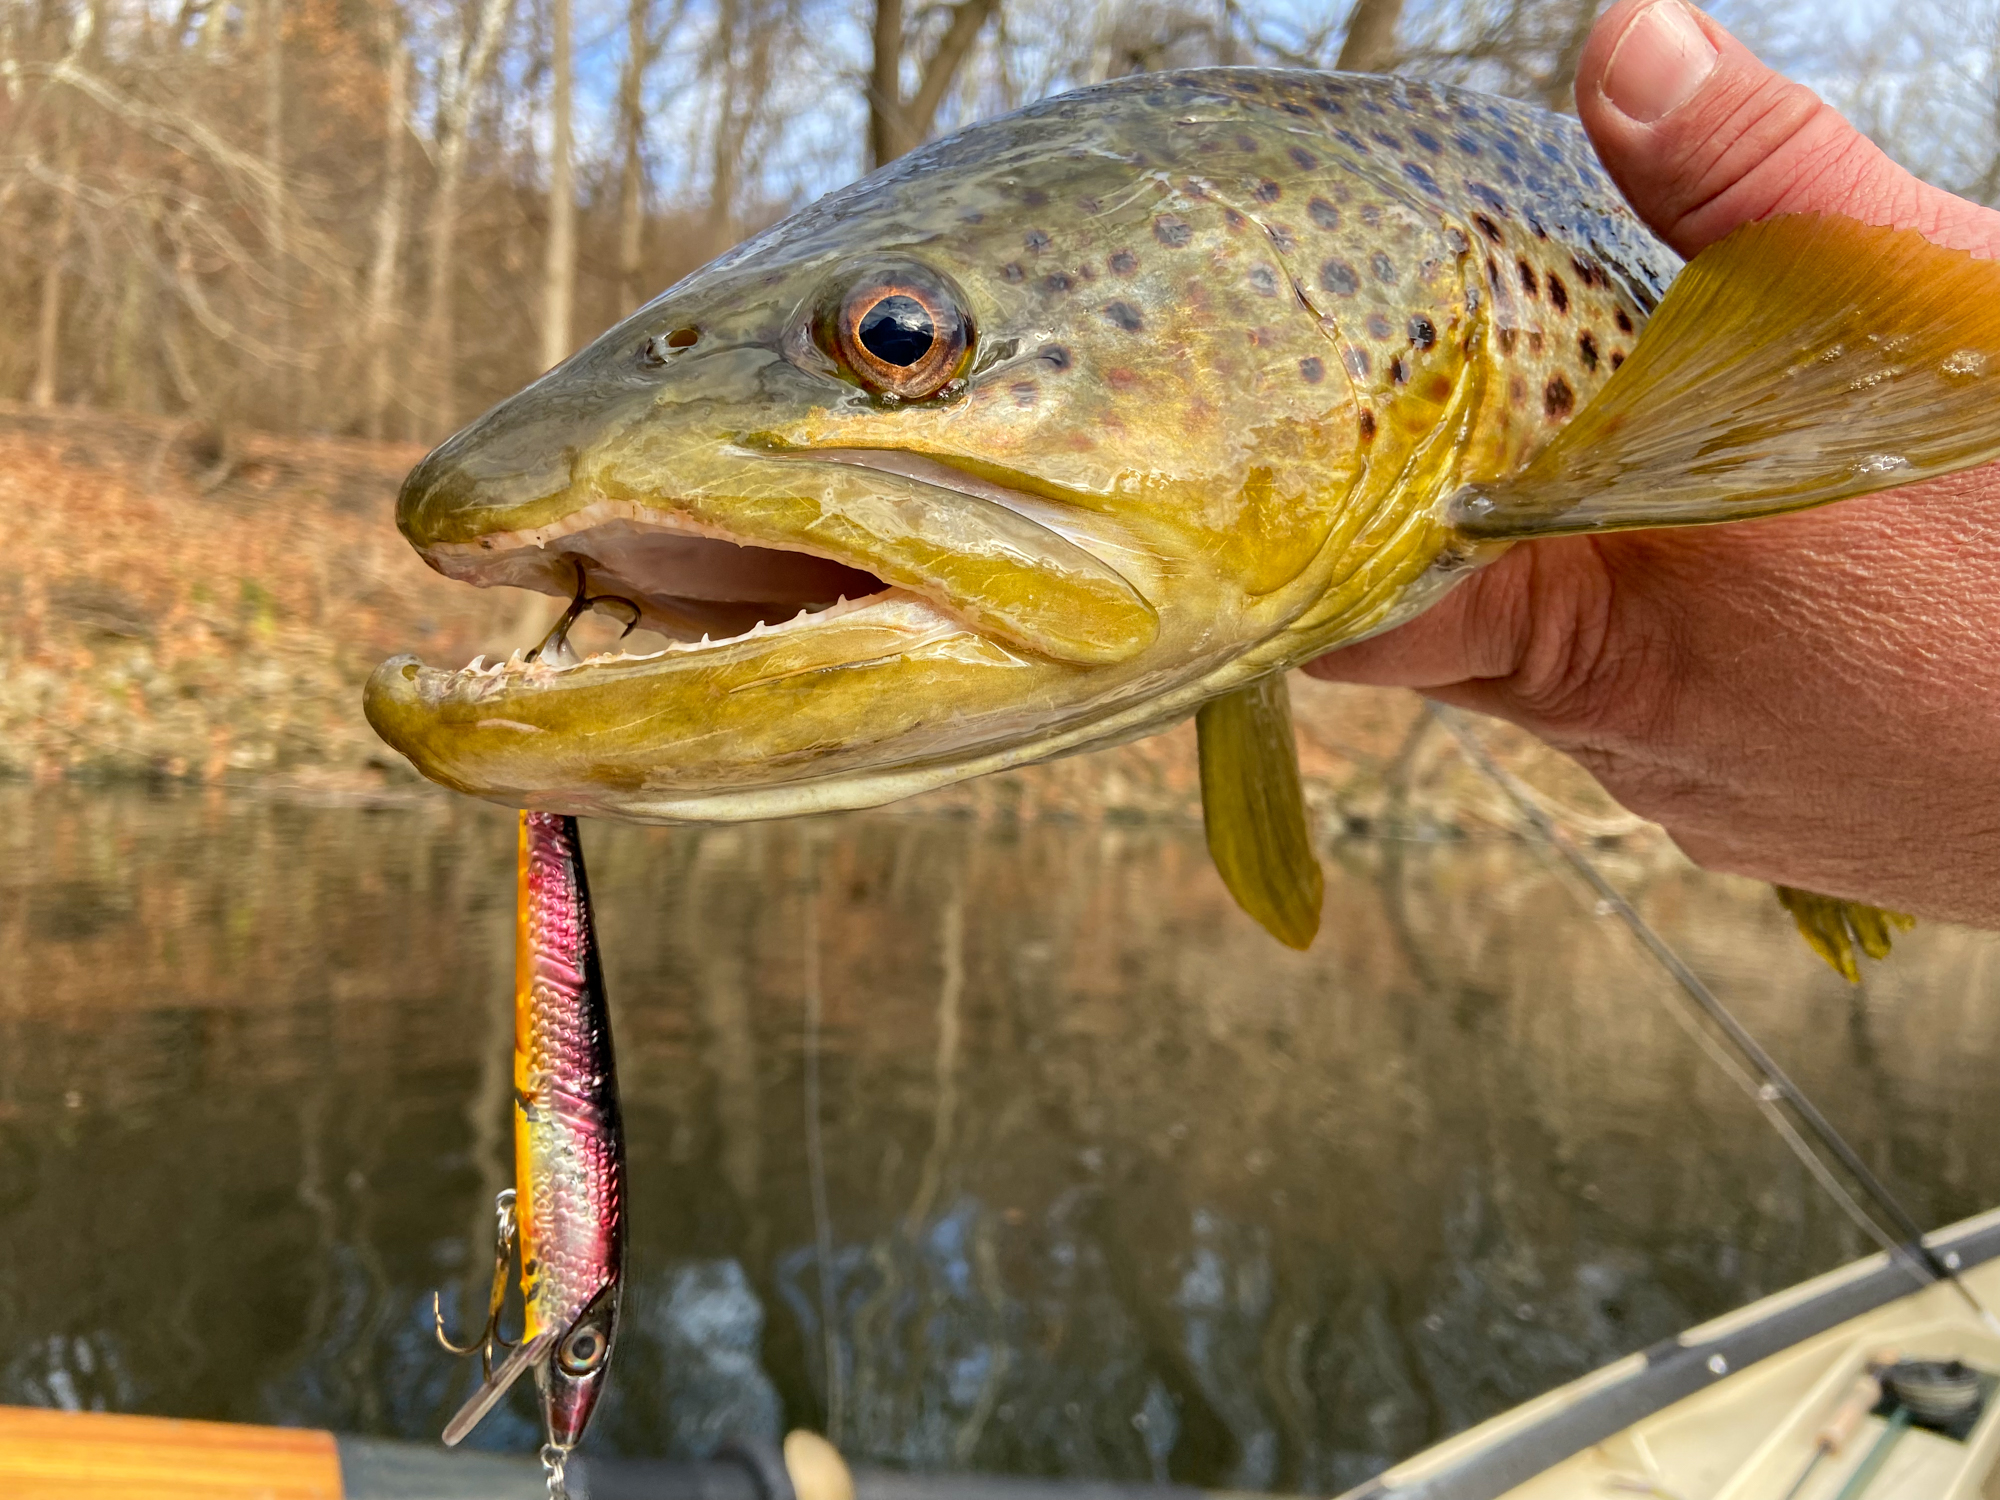 Throwing Big Baits for Big Michigan Trout